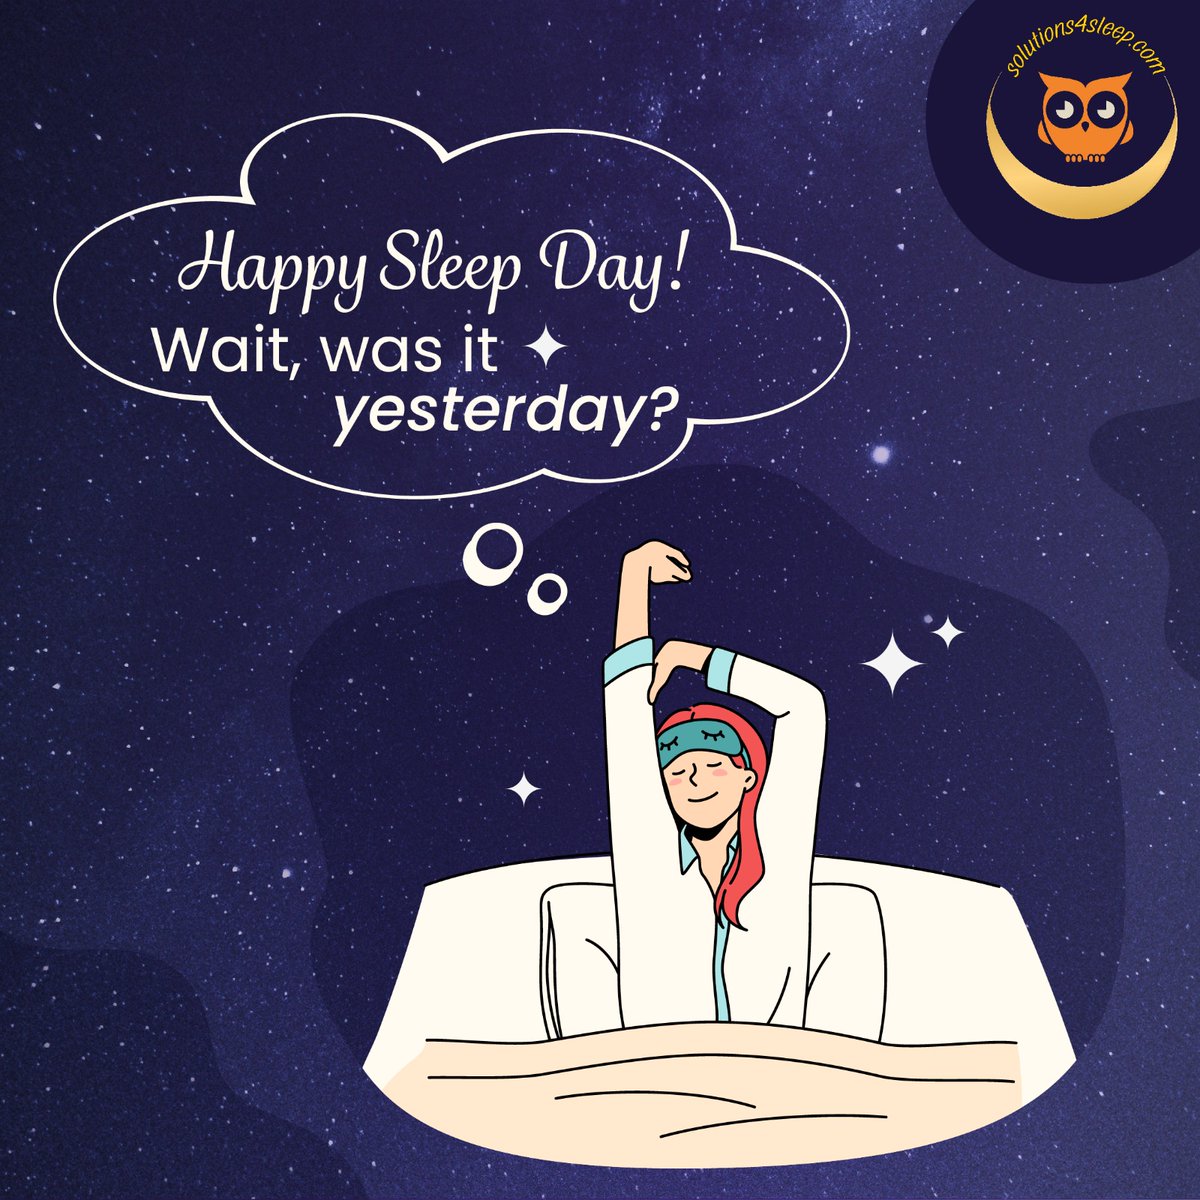 Yes we know it was yesterday but we were busy sleeping. After all, sleep is something to be celebrated. 
Here's wishing you again Happy World Sleep Day!

#Solutions4Sleep #WorldSleepDay #GoodNightSleep #SleepSolutions #SleepforHealth #BetterSleepBetterLife